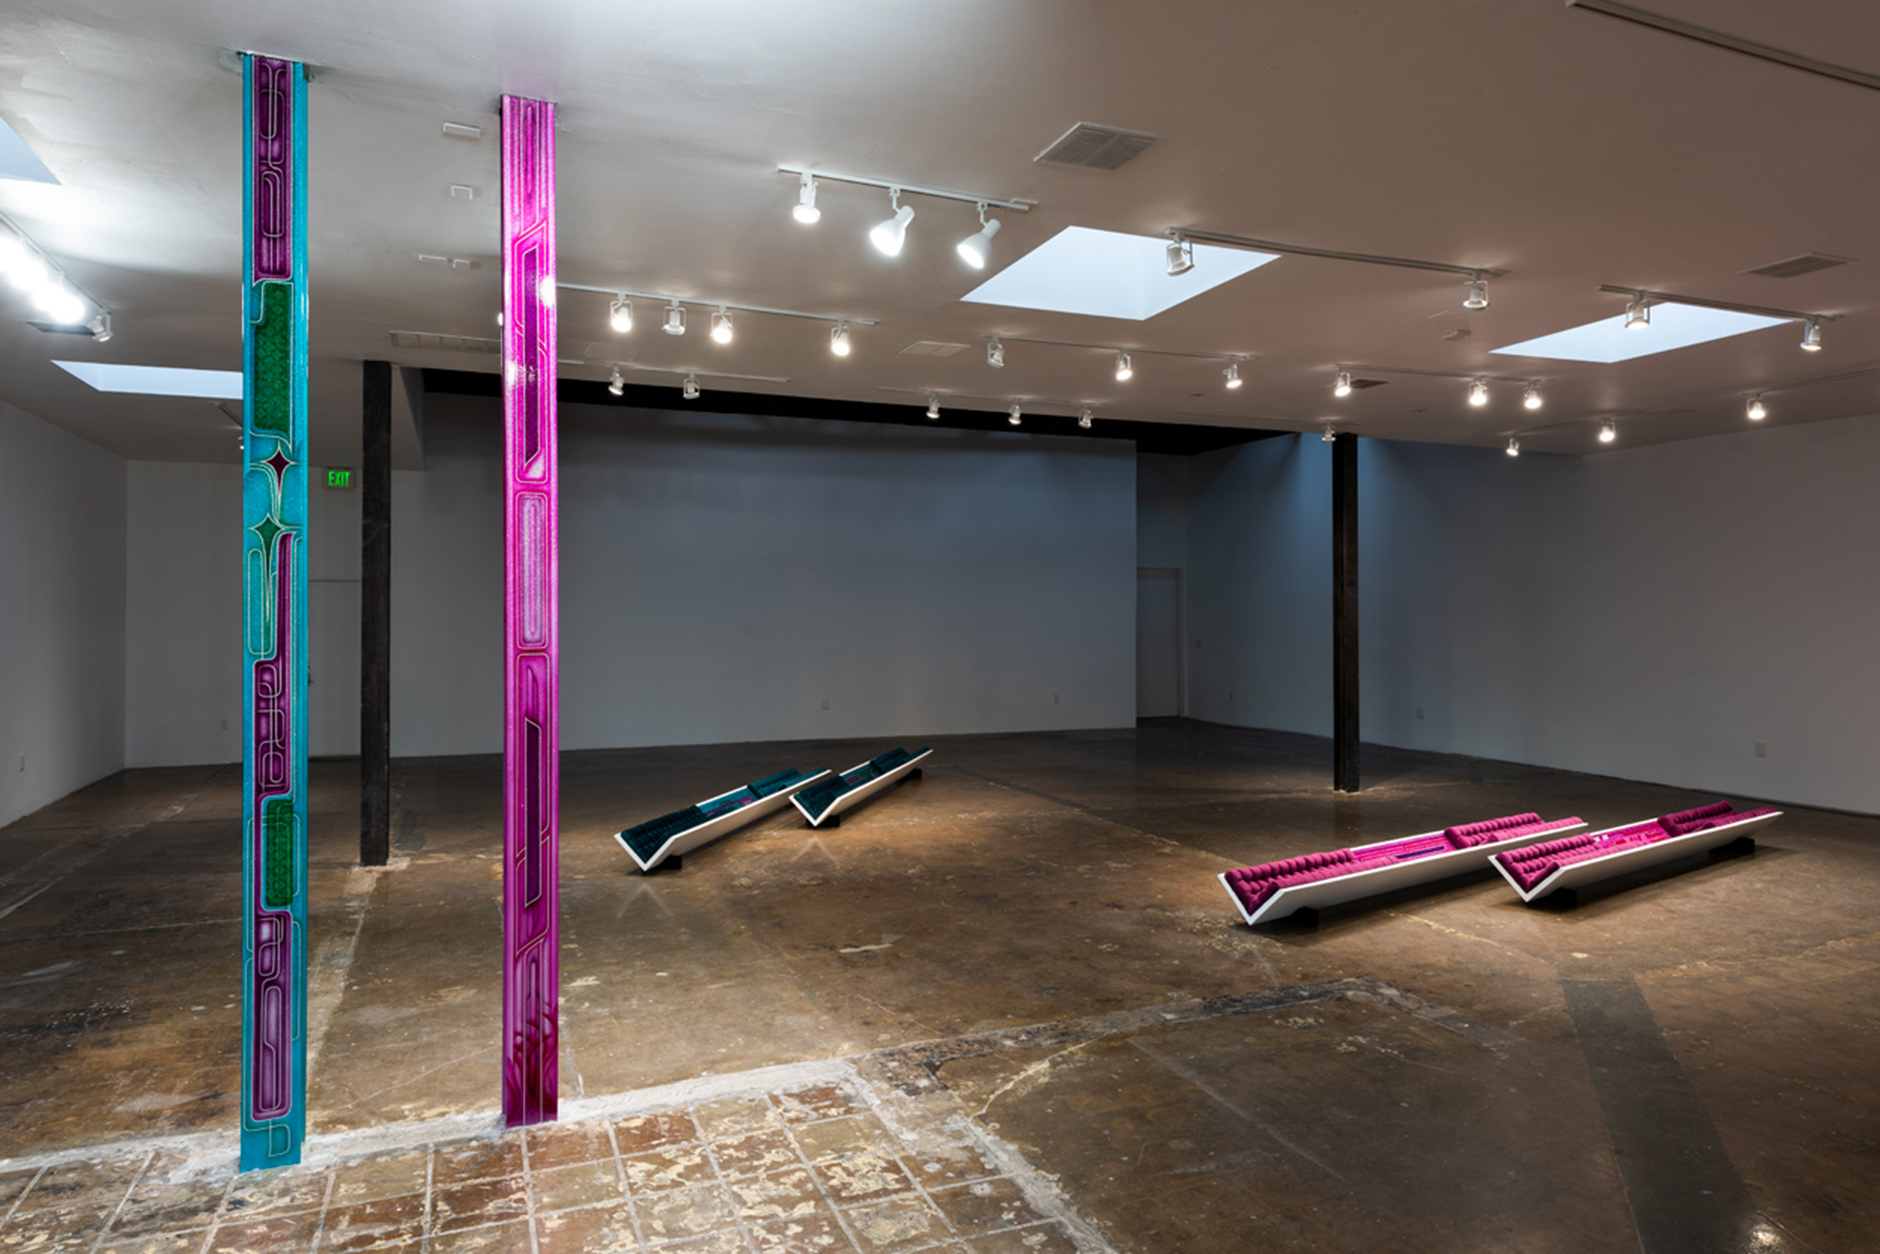 The photo is of Some Reach While Others Clap, 2020 of a bare gallery room with white walls and concrete floors. In dim lighting there are two pillars in the foreground, the left one is bright turquoise with pink designs, immediately to the right is a thin pillar that is bright pink with turquoise designs. 2 sets of 2 angle beams, one set in turquoise and the other in pink, are laying on the ground in the background stretching across the floor. All are painted in glitter paint and upholstered in matching velvet fabric referencing low-rider cars.